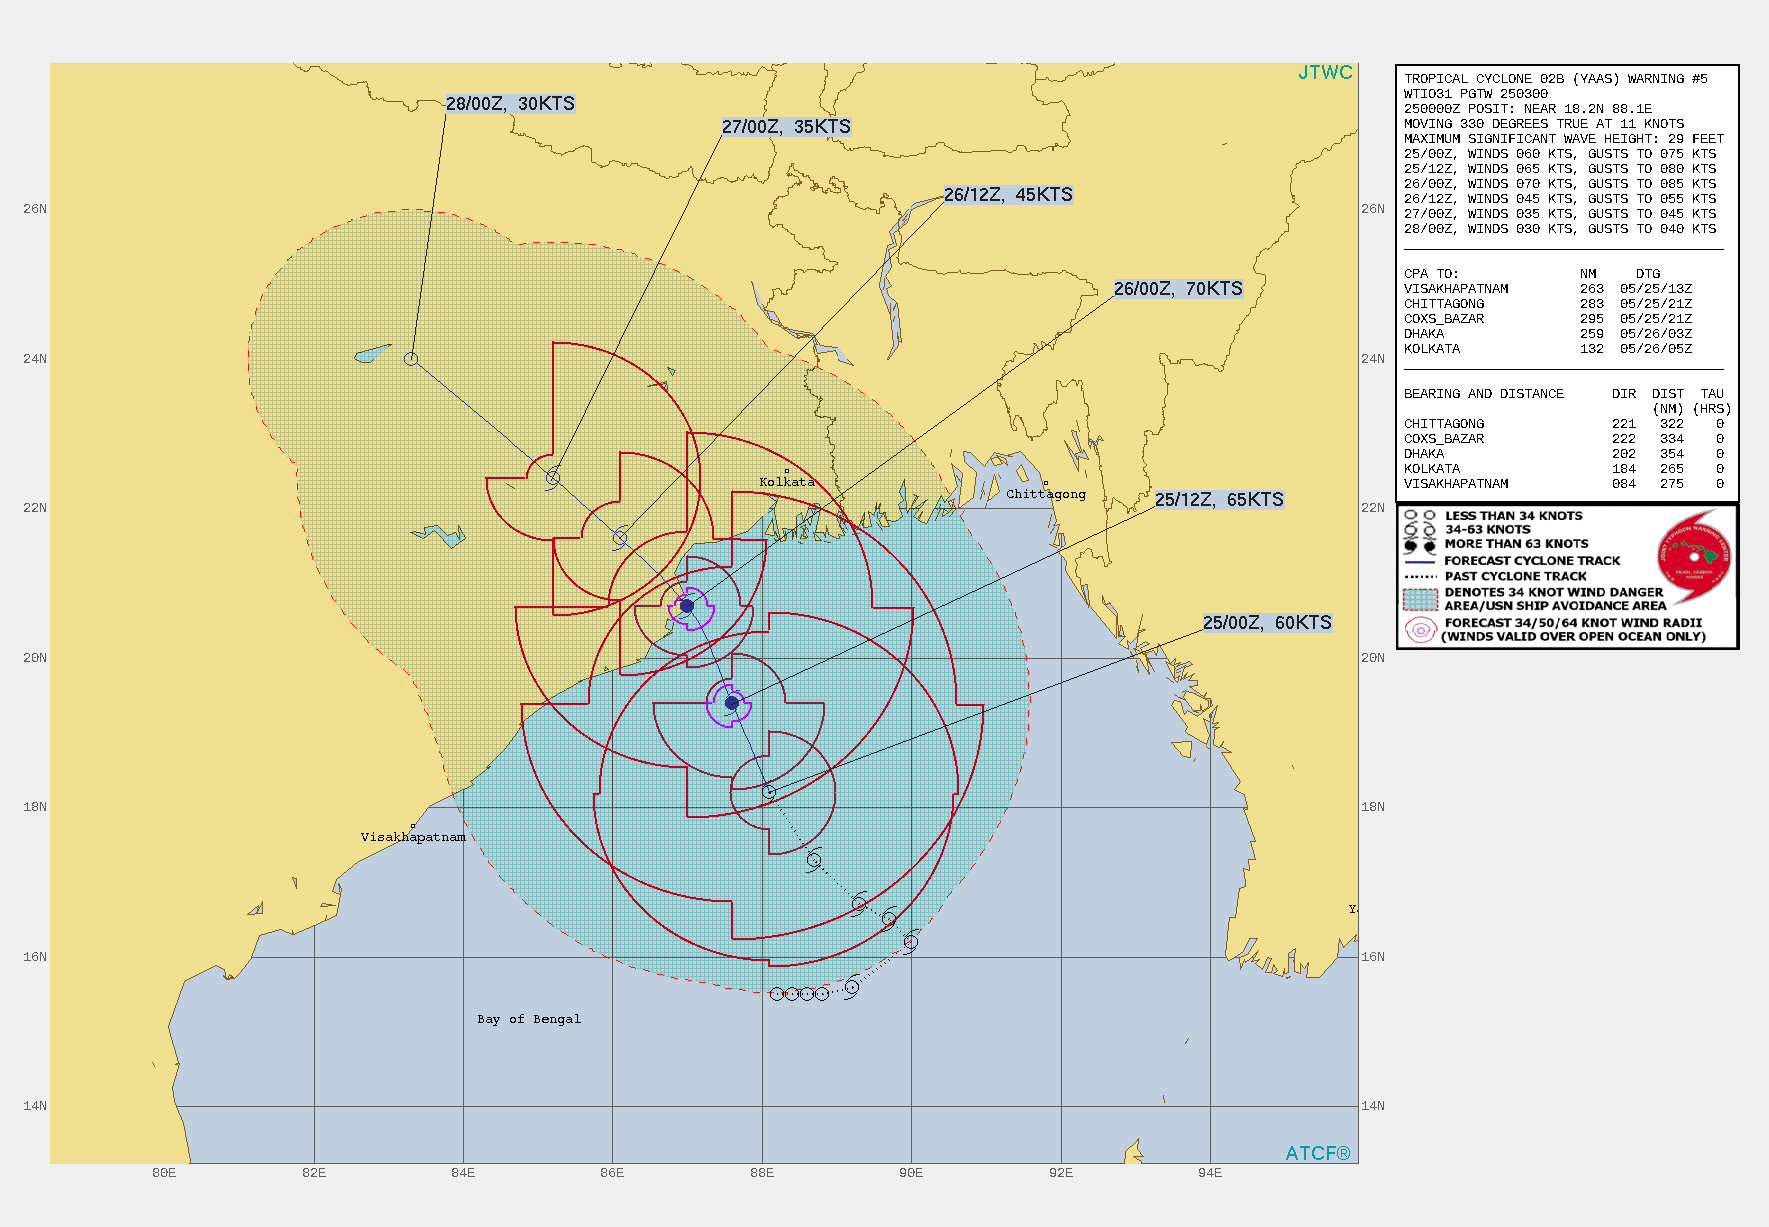 TC 02B(YAAS). WARNING 5 ISSUED AT 25/03UTC.TC 02B IS CURRENTLY IN A MARGINALLY FAVORABLE ENVIRONMENT WITH ROBUST  WESTWARD AND POLEWARD OUTFLOW ALOFT AND VERY WARM (31-32 C) SEA  SURFACE TEMPERATURES OFFSET BY MODERATE RELATIVE VERTICAL WIND SHEAR  (15-20 KTS). THE SYSTEM IS FORECAST TO REMAIN IN THE MARGINALLY  FAVORABLE ENVIRONMENT FOR THE NEXT 24 HOURS UP TO LANDFALL AT 26/00Z  AS IT WILL CONTINUE TO INTENSIFY AND TRACK NORTH-NORTHWESTWARD ALONG  THE WESTERN PERIPHERY OF A SUBTROPICAL RIDGE TO THE NORTHEAST. AFTER  12H, THE VERTICAL WIND SHEAR IS FORECAST TO DECREASE TO